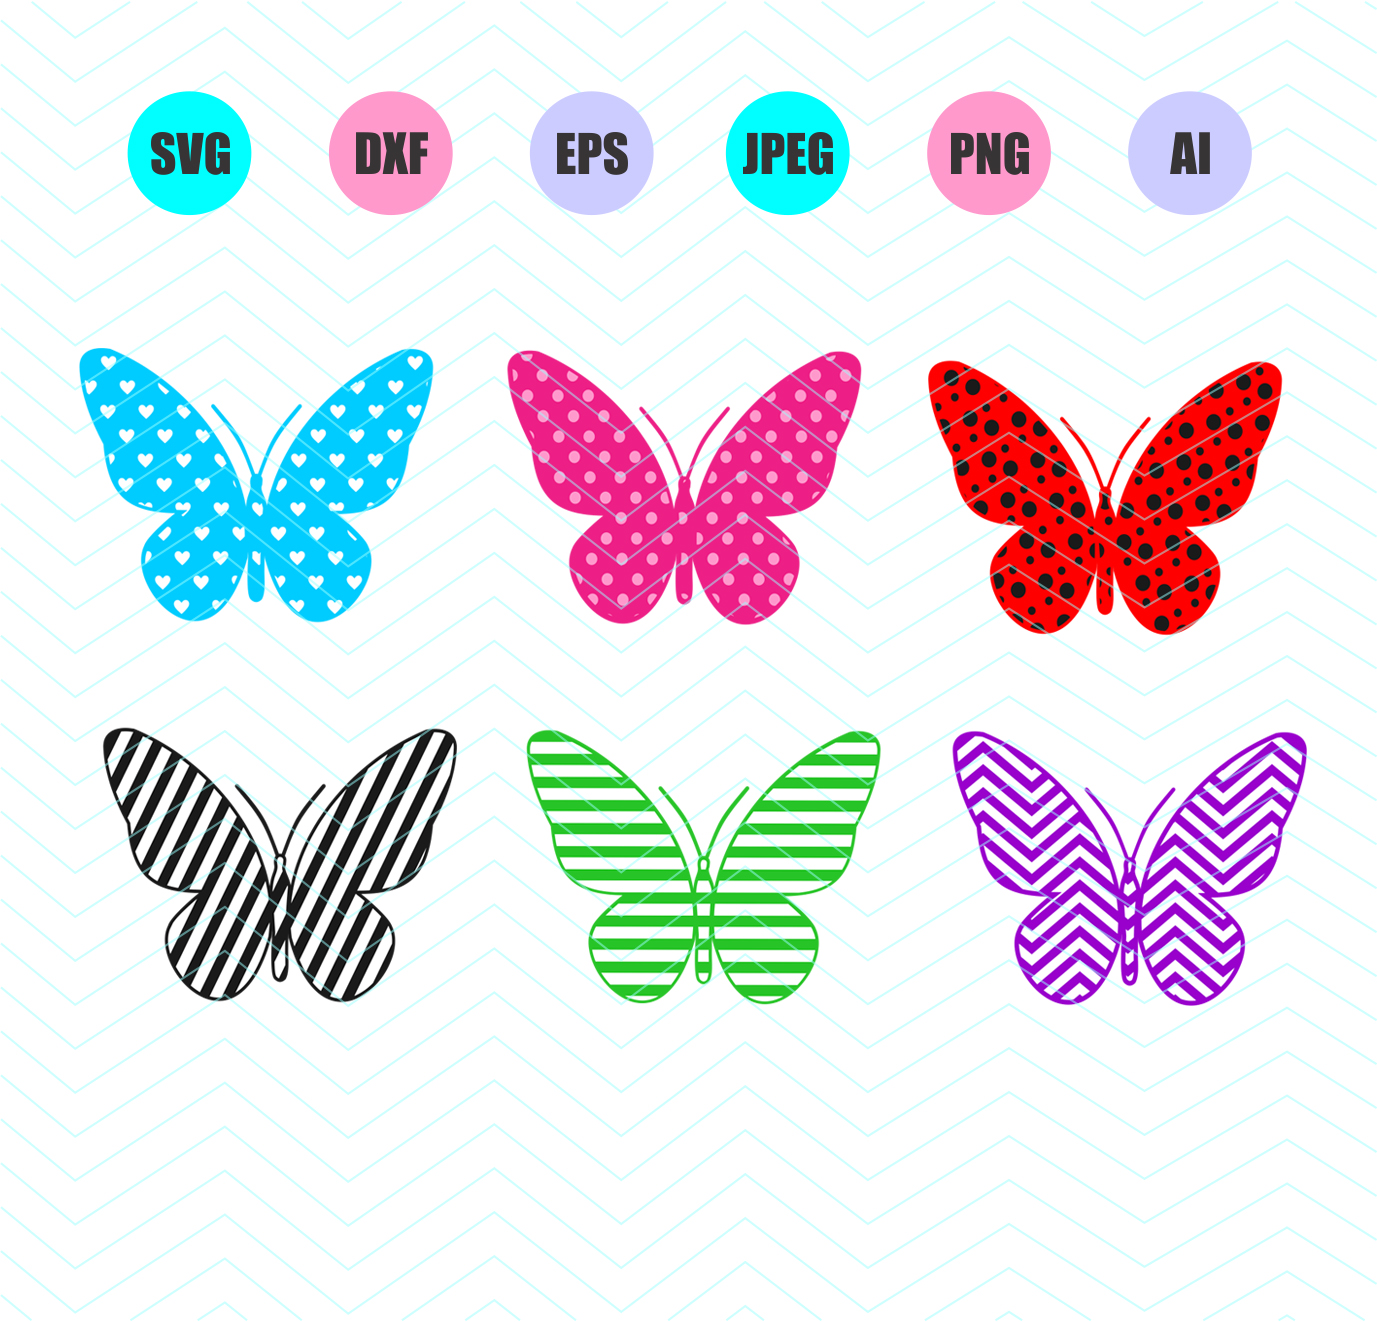 Download Butterfly pattern Svg Dxf Eps Png Jpg Ai Cut Vector File ...